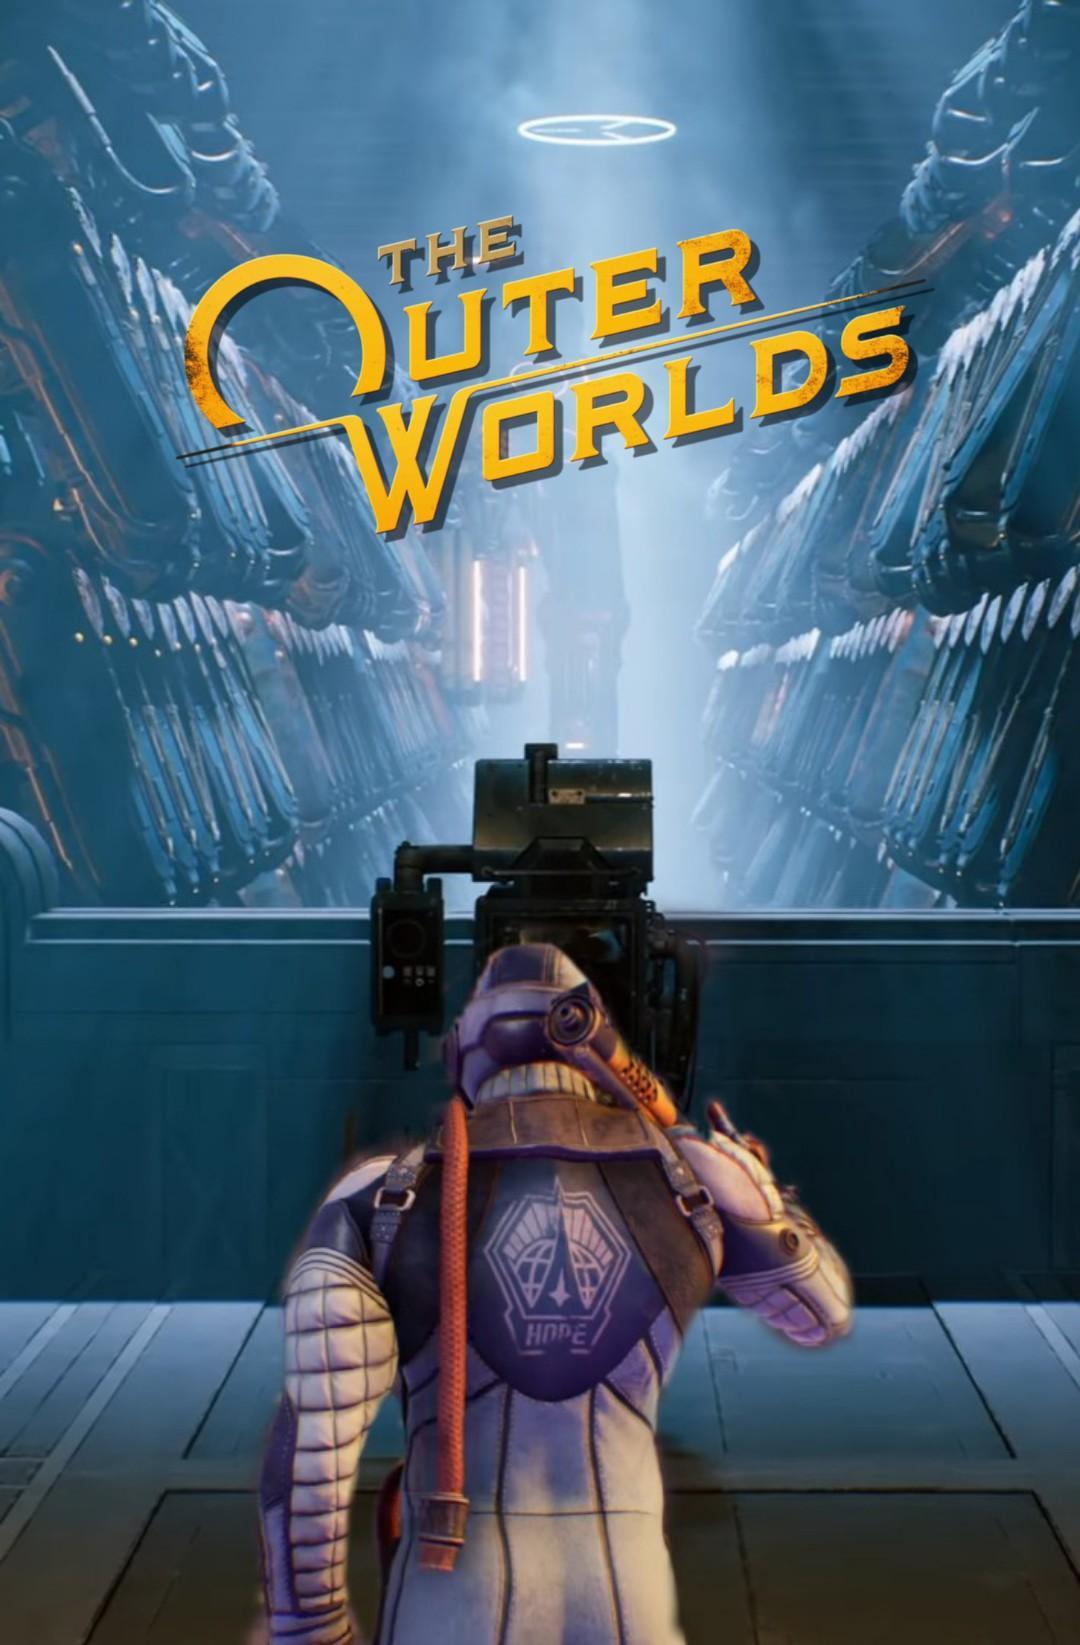 The outer worlds phone wallpaper